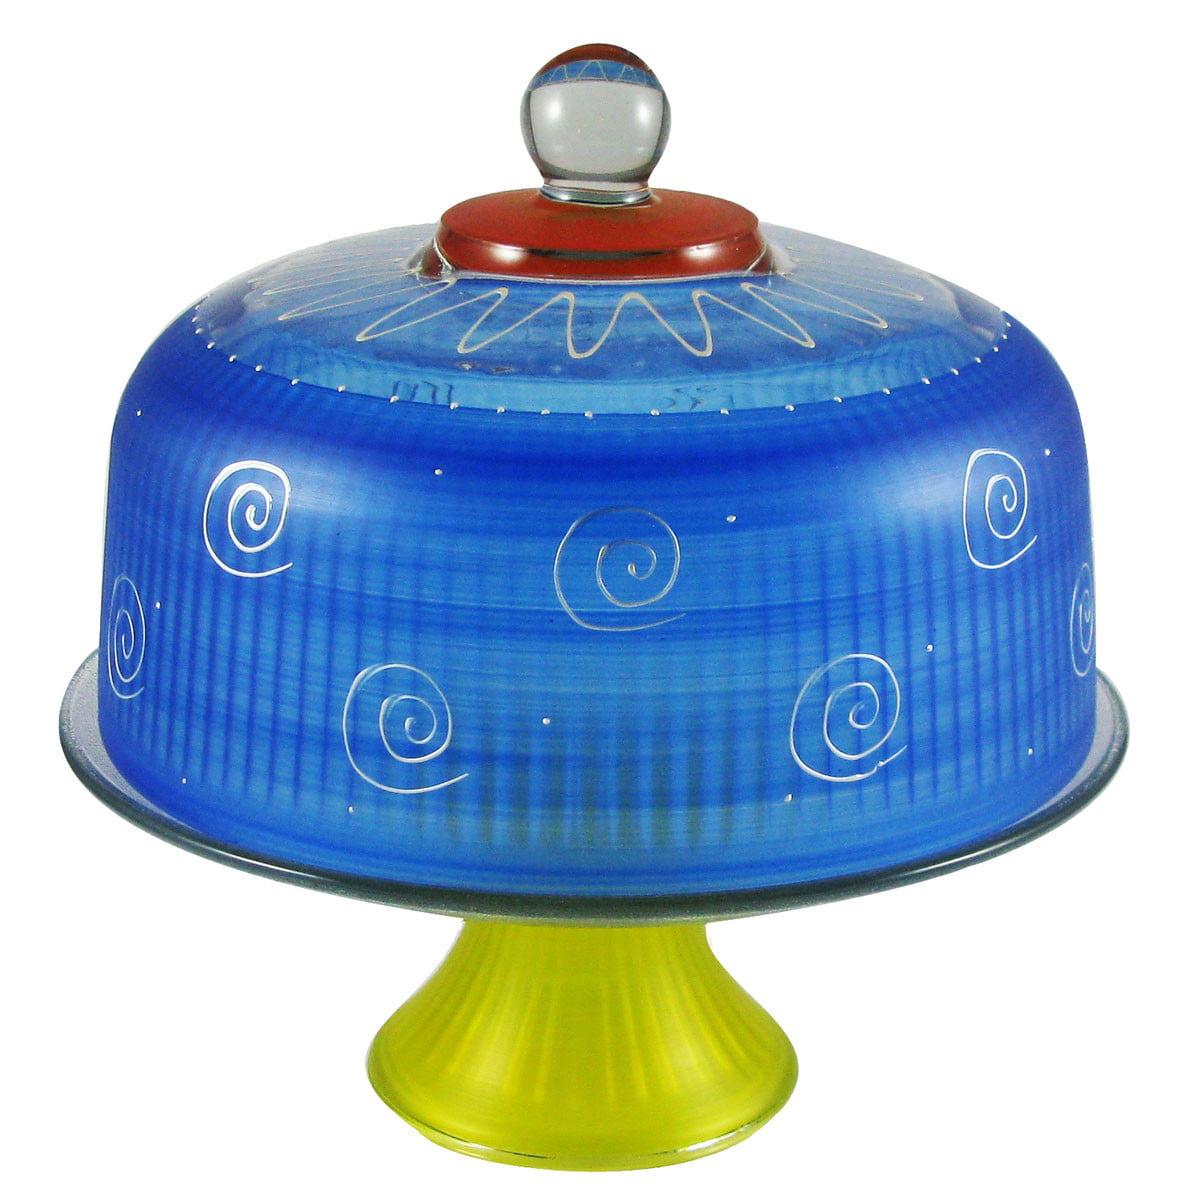 Orange Glass Cake Pie Plate & Round Dome Cover Stand Lid Display Convertible Set 